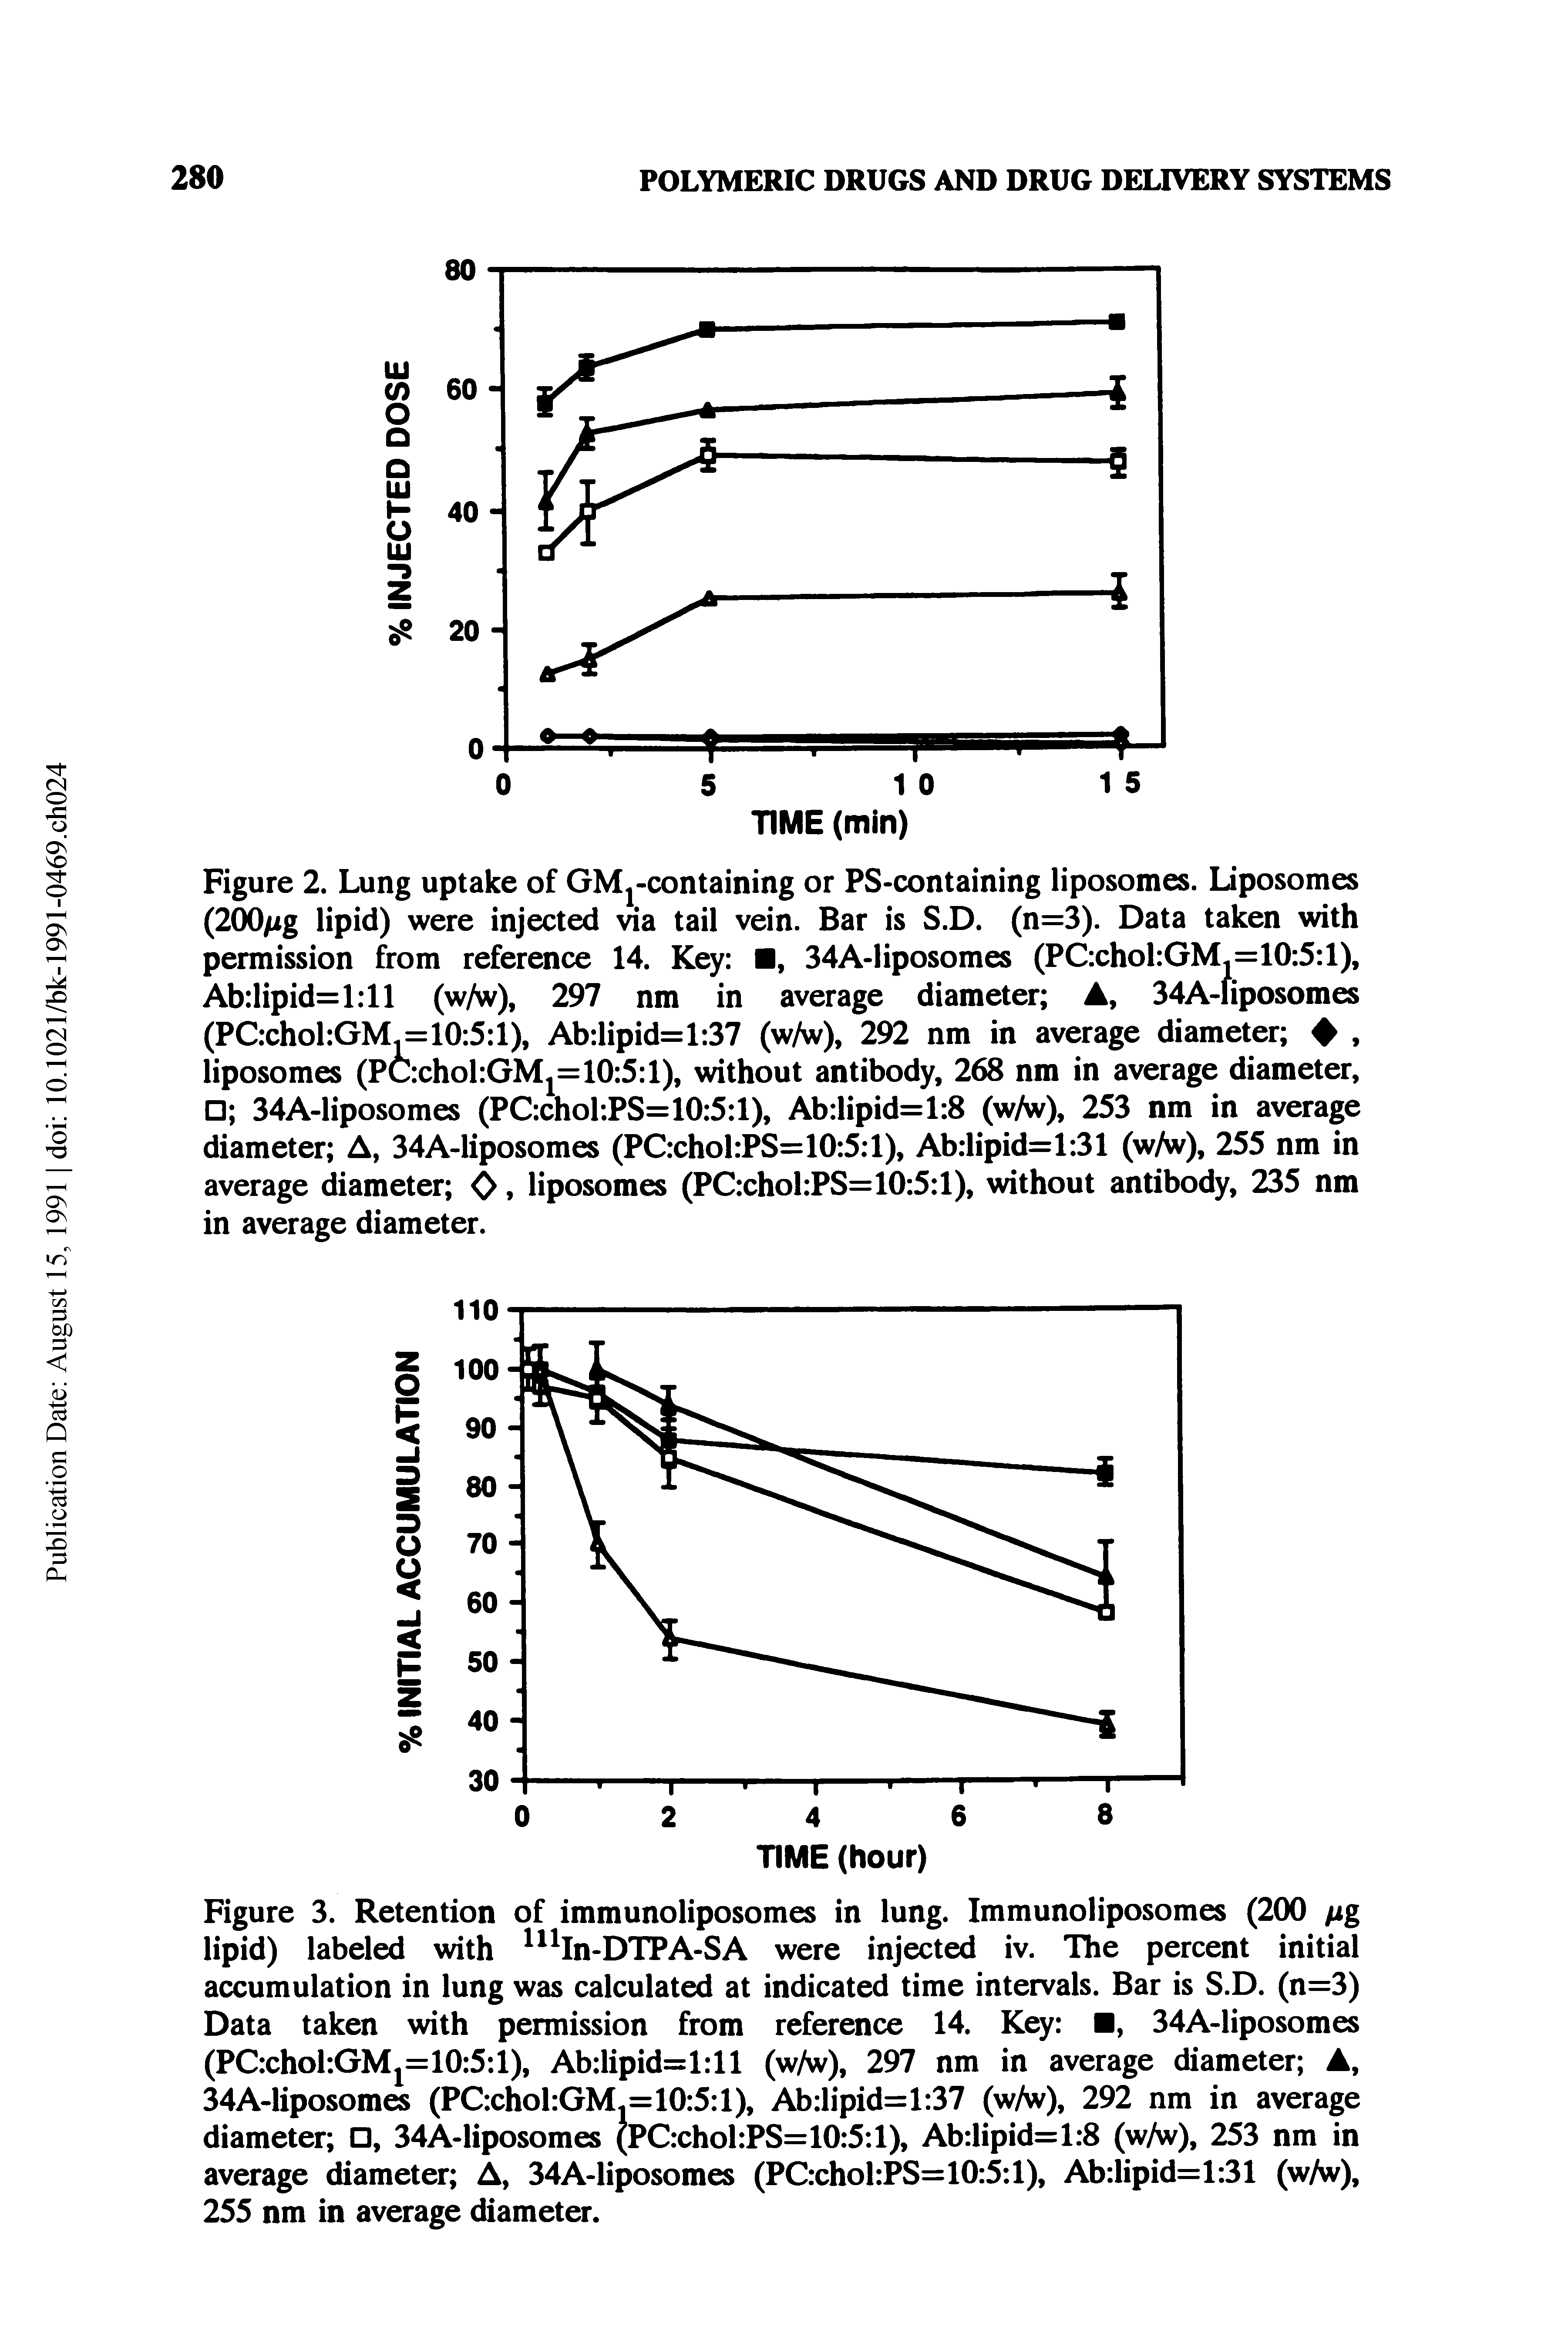 Figure 2. Lung uptake of GMj-containing or PS-containing liposomes. Liposomes (200/ig lipid) were injected via tail vein. Bar is S.D. (n=3). Data taken with permission from reference 14. Key , 34A-liposomes (PC chol GM.=10 5 1), Ab lipid= 1 11 (w/w), 297 nm in average diameter A, 34A-liposomes...